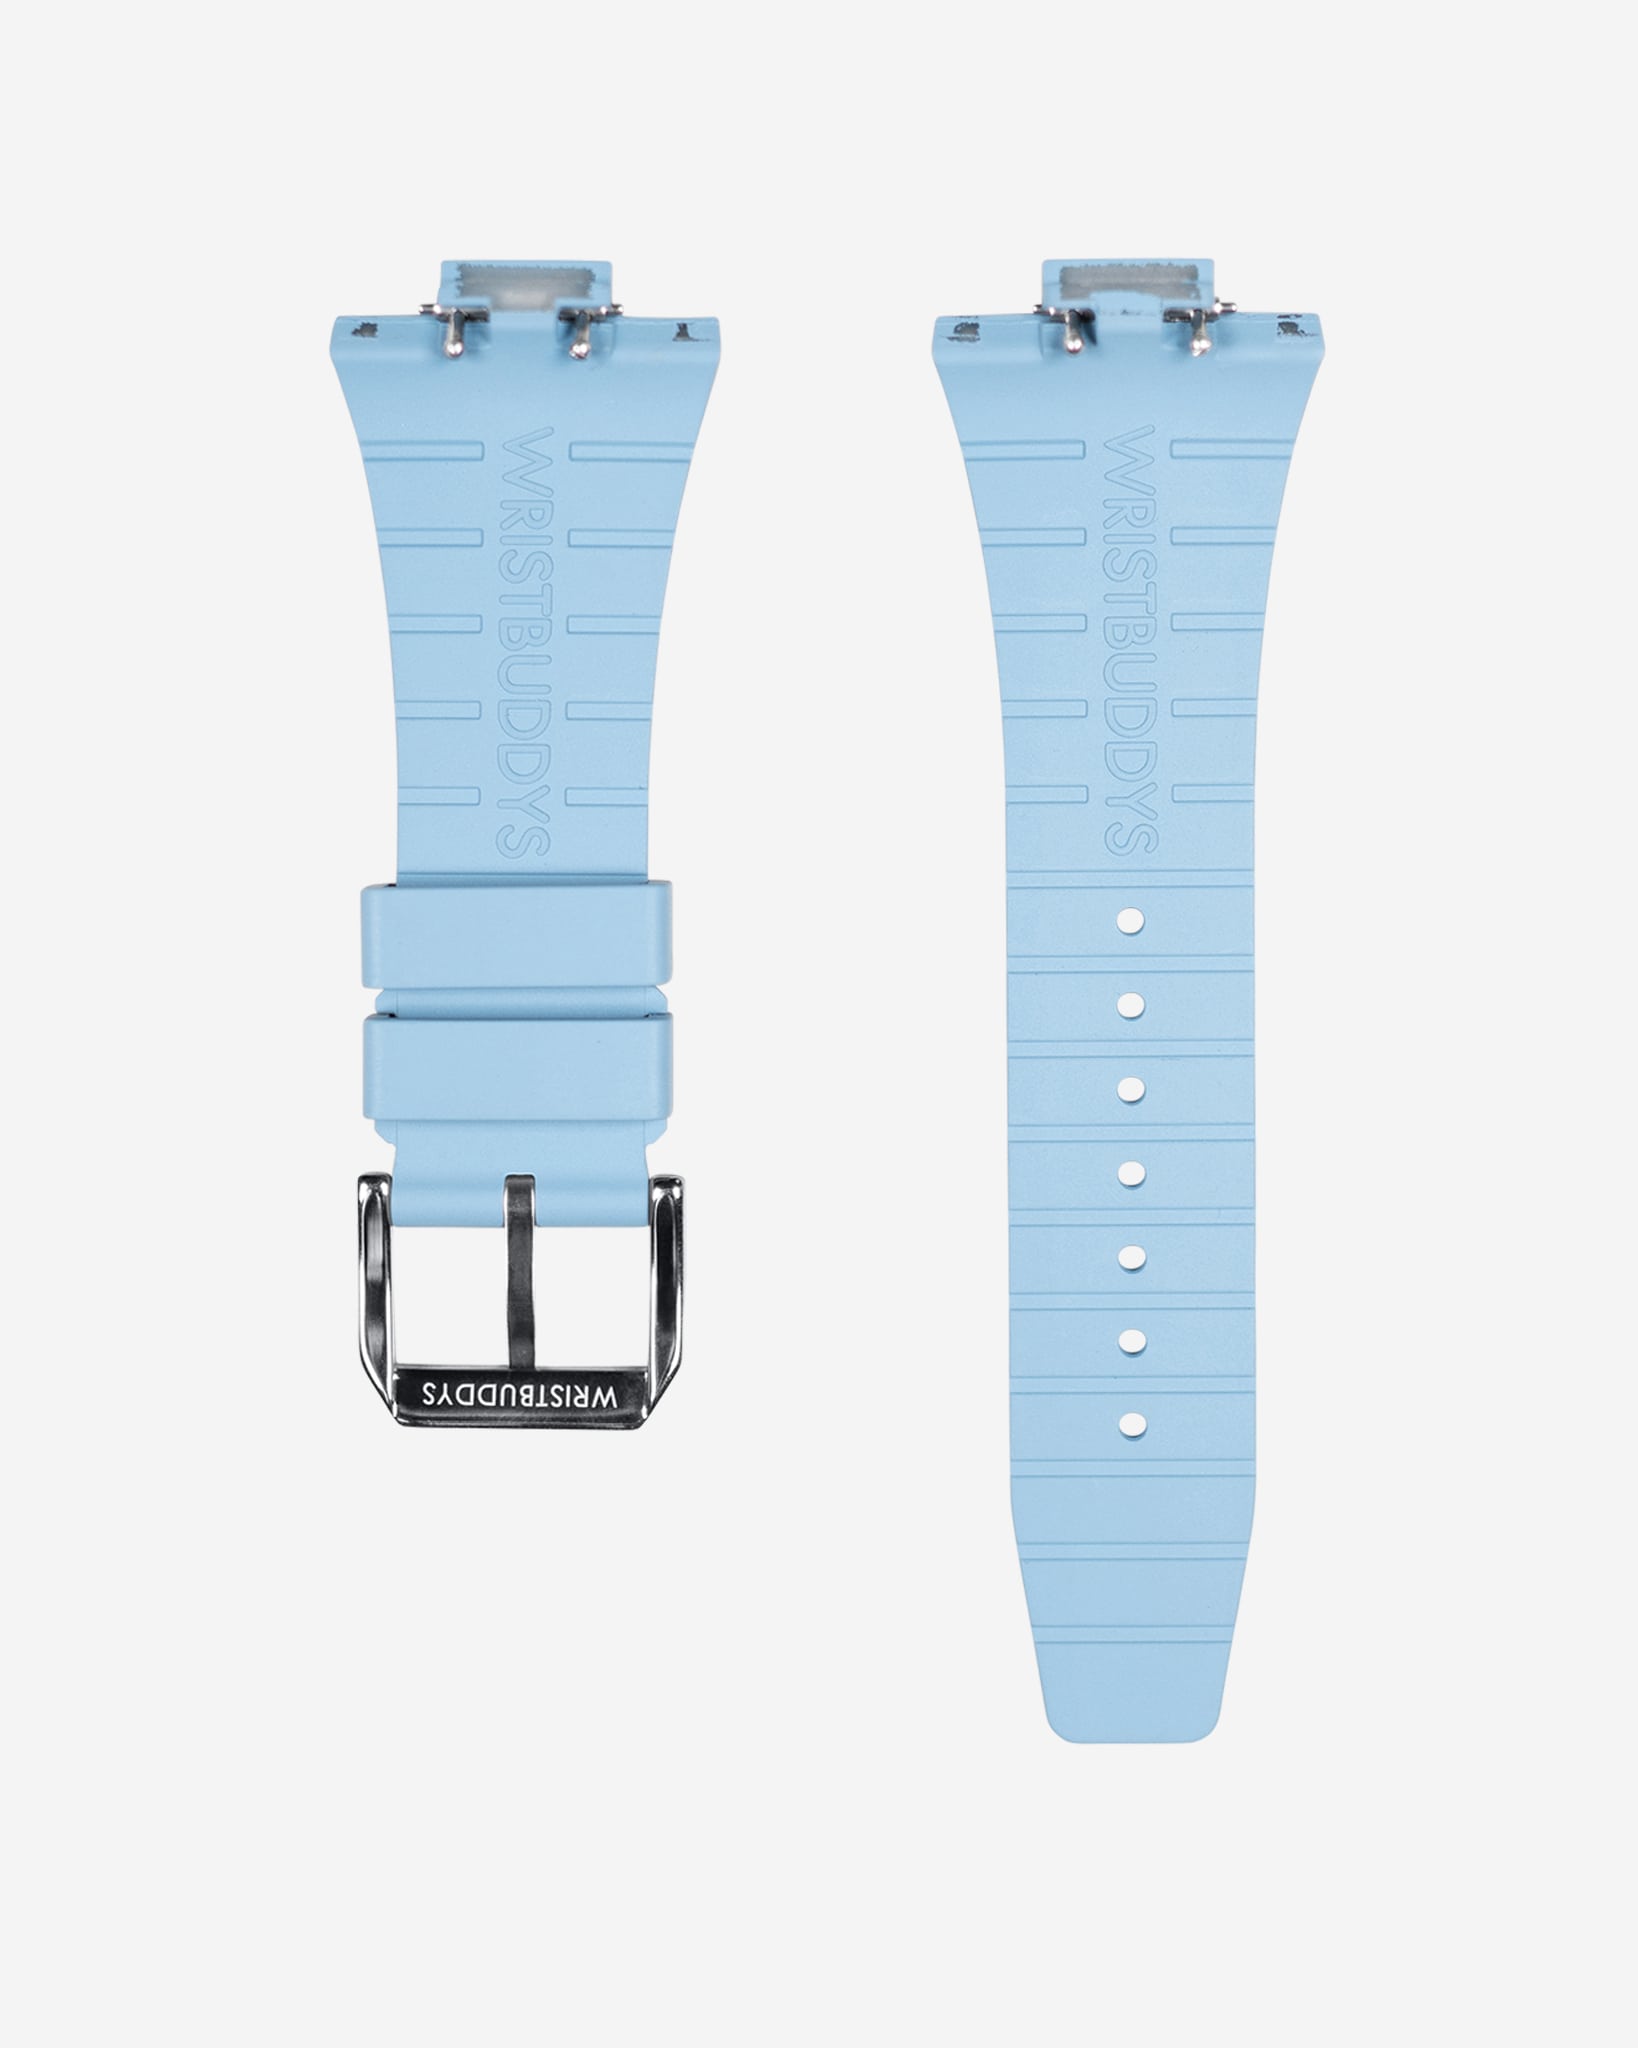 tissot prx straps powermatic 80 rubber perfect fit straps for tissot prx replacement Bracelet alternatives Aftermarket bands Custom straps Wristband choices Rubber band collection upgrades High-quality bands Watch accessories Strap Watchband ice blue blue